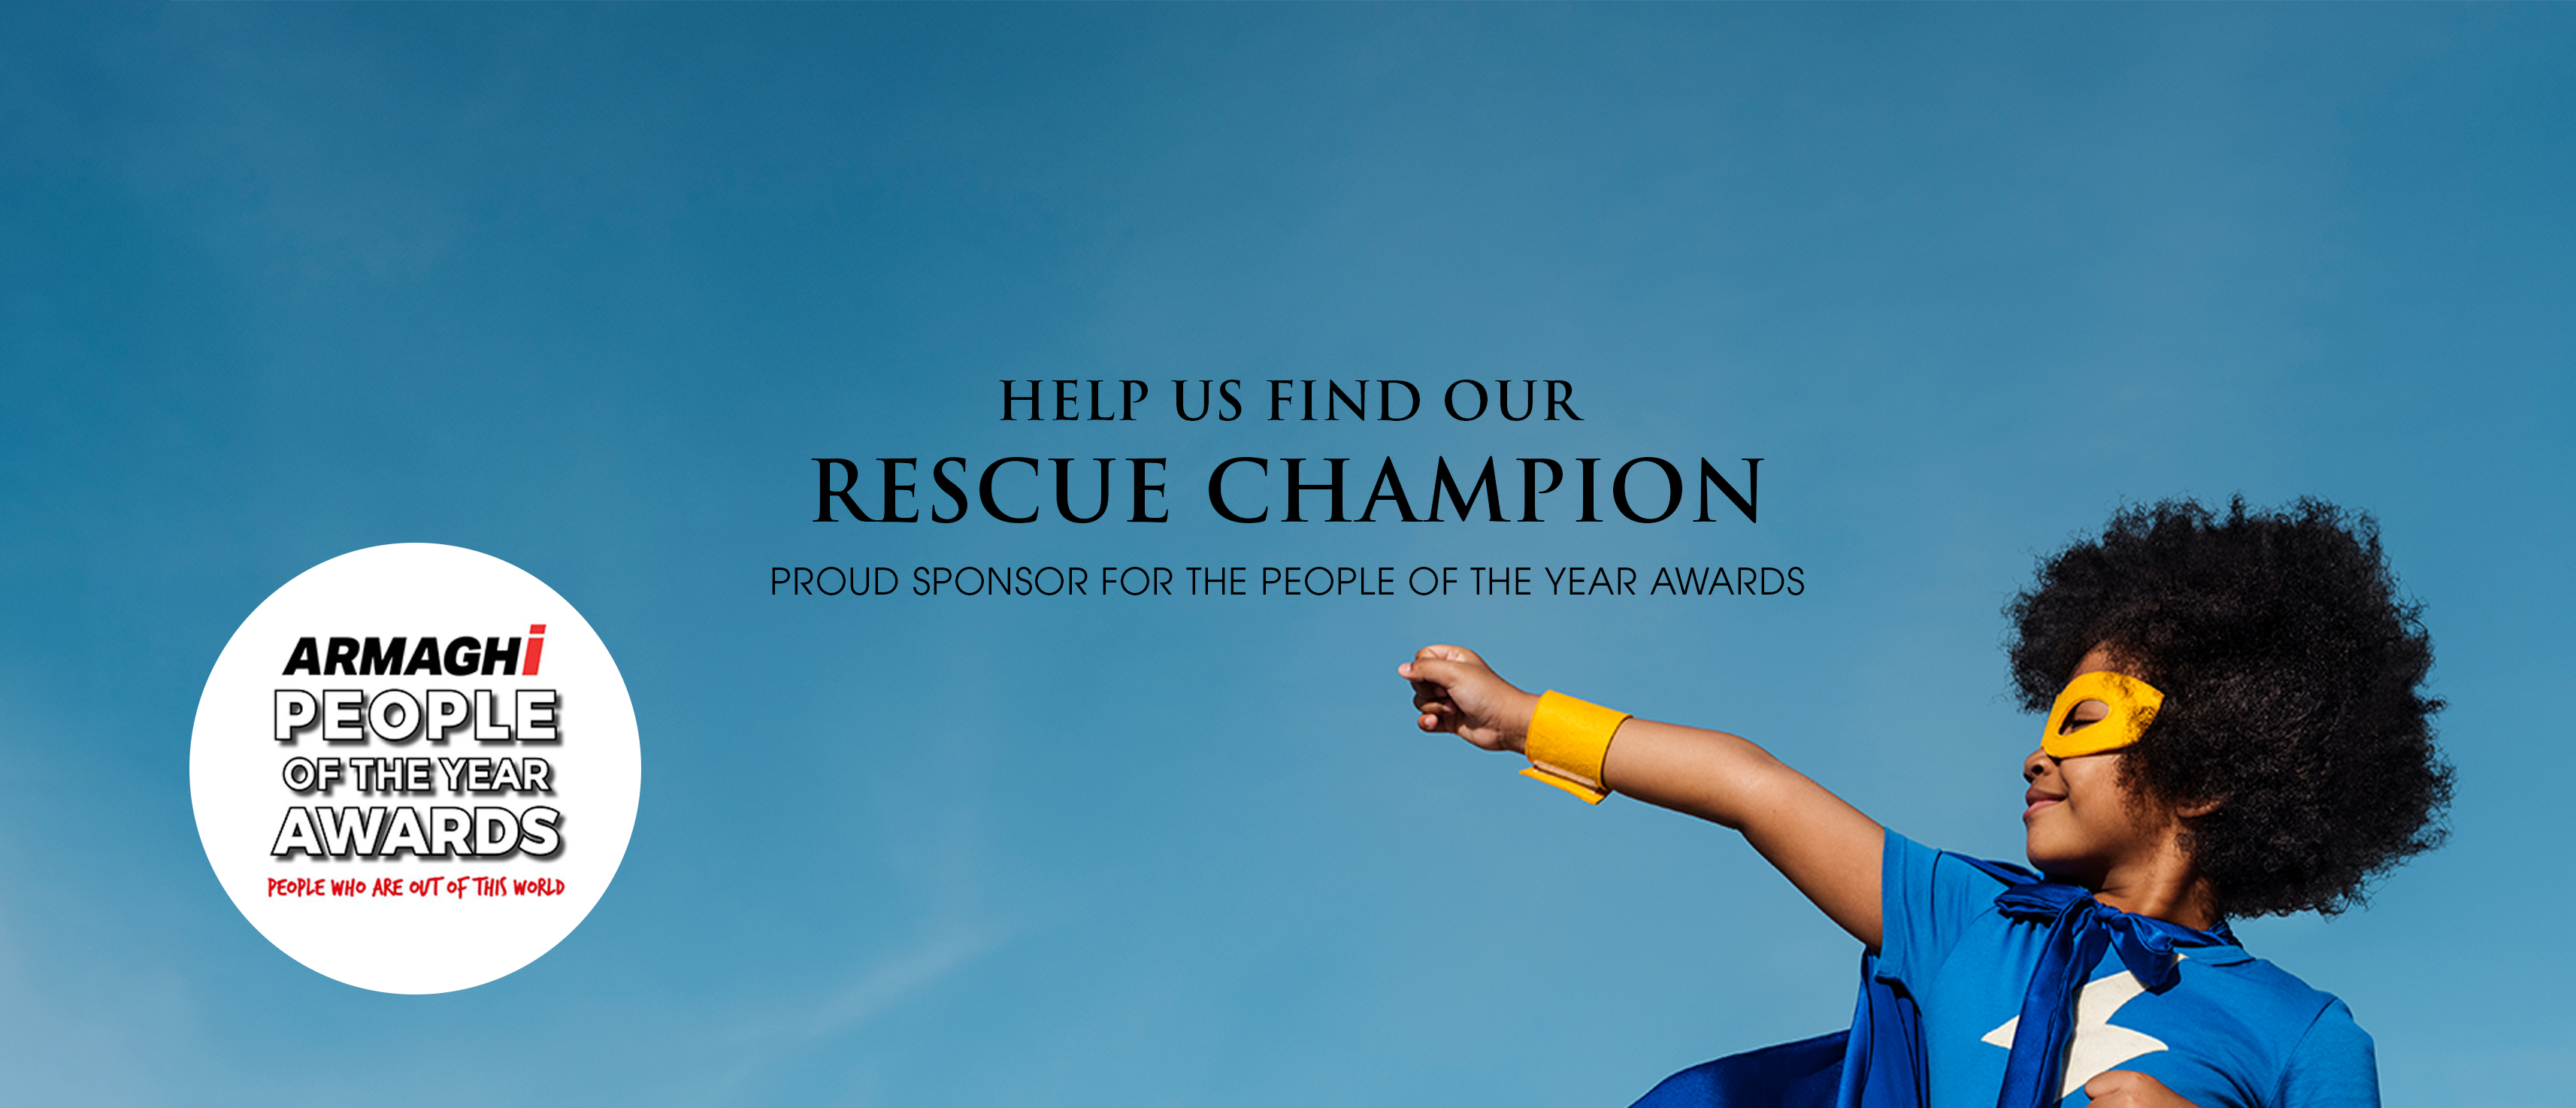 Help us find our rescue champion of the year 